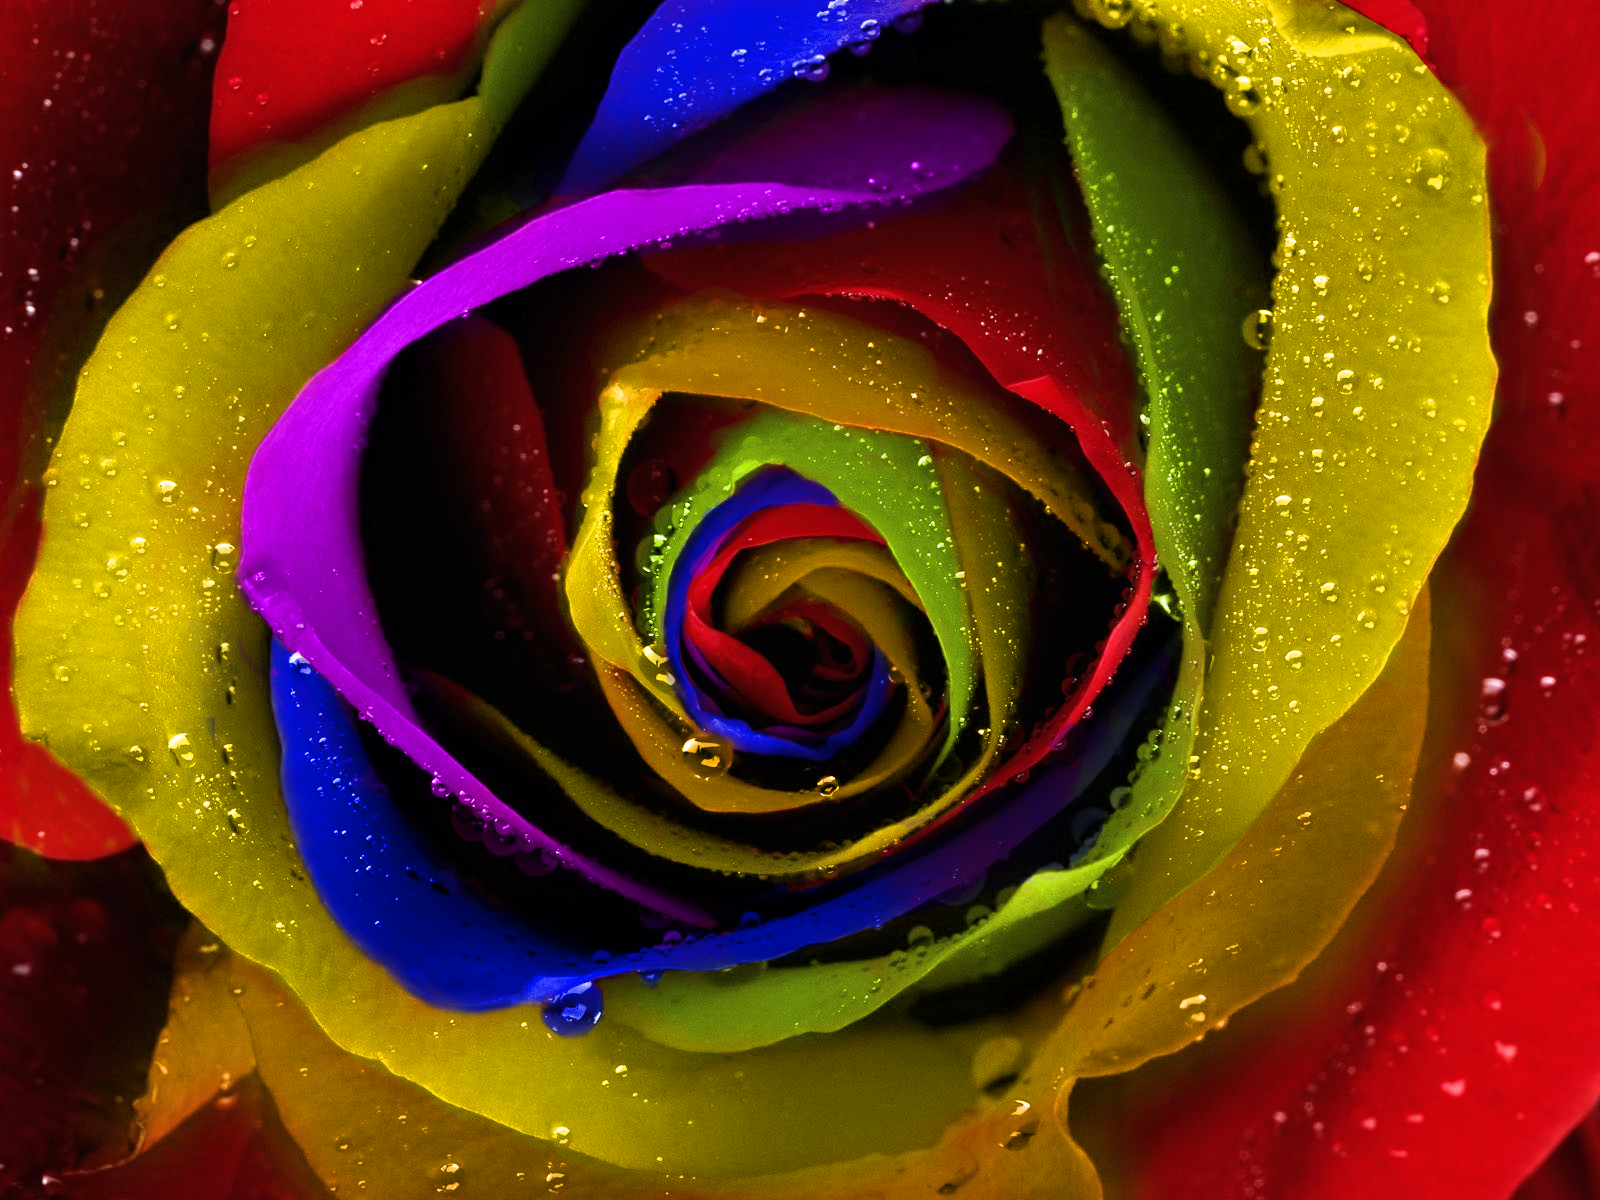 Free download Rainbow Roses Wallpaper High Definition High Quality Widescreen [1600x1200] for your Desktop, Mobile & Tablet. Explore Rainbow Roses Wallpaper. Rainbow Flower Wallpaper, HD Rainbow Wallpaper